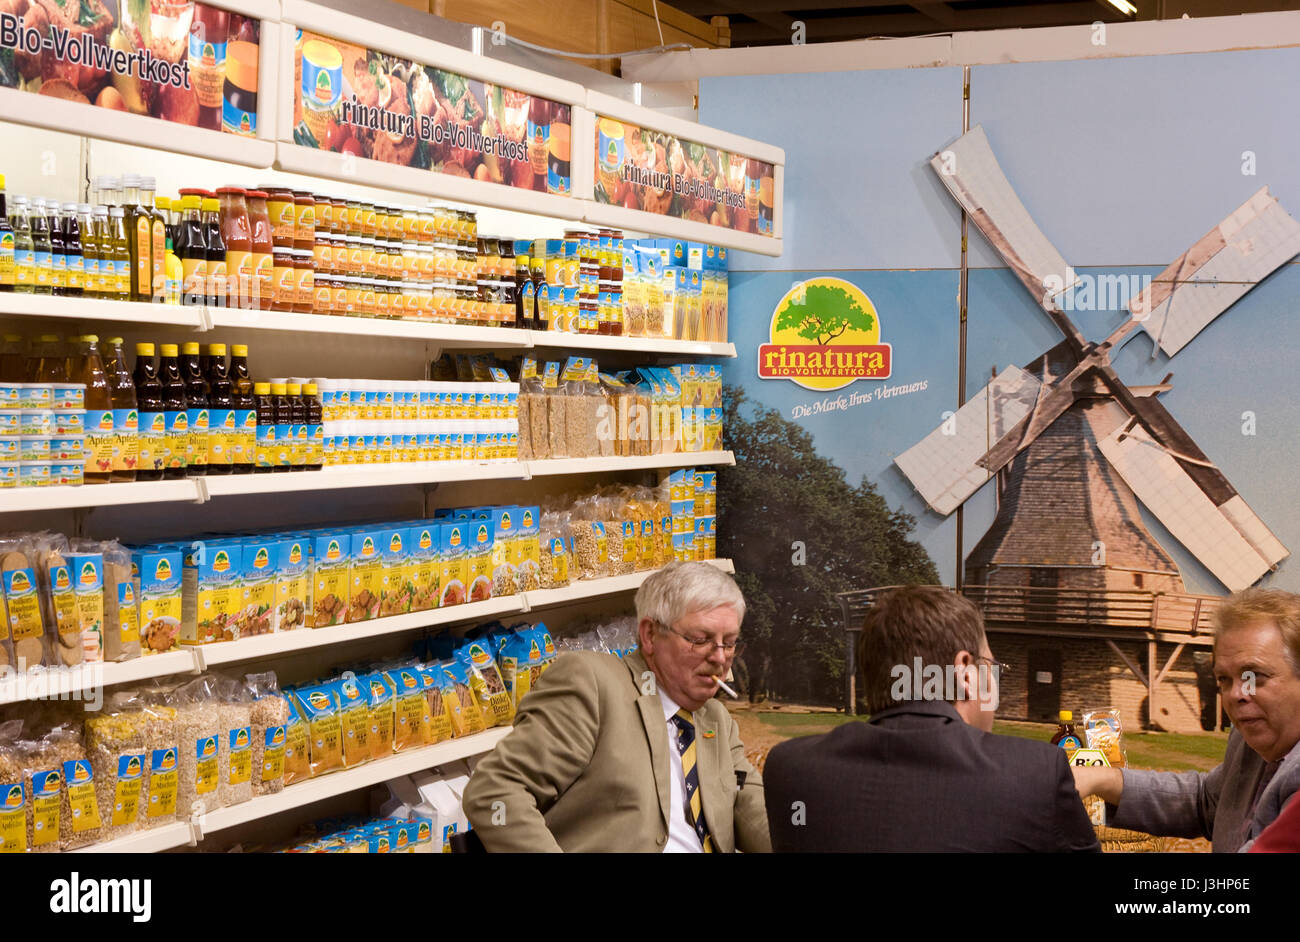 Germany, Cologne, the ANUGA food and beverages trade fair at the exhibition center in the district Deutz, stall of the company Rinatura. Stock Photo